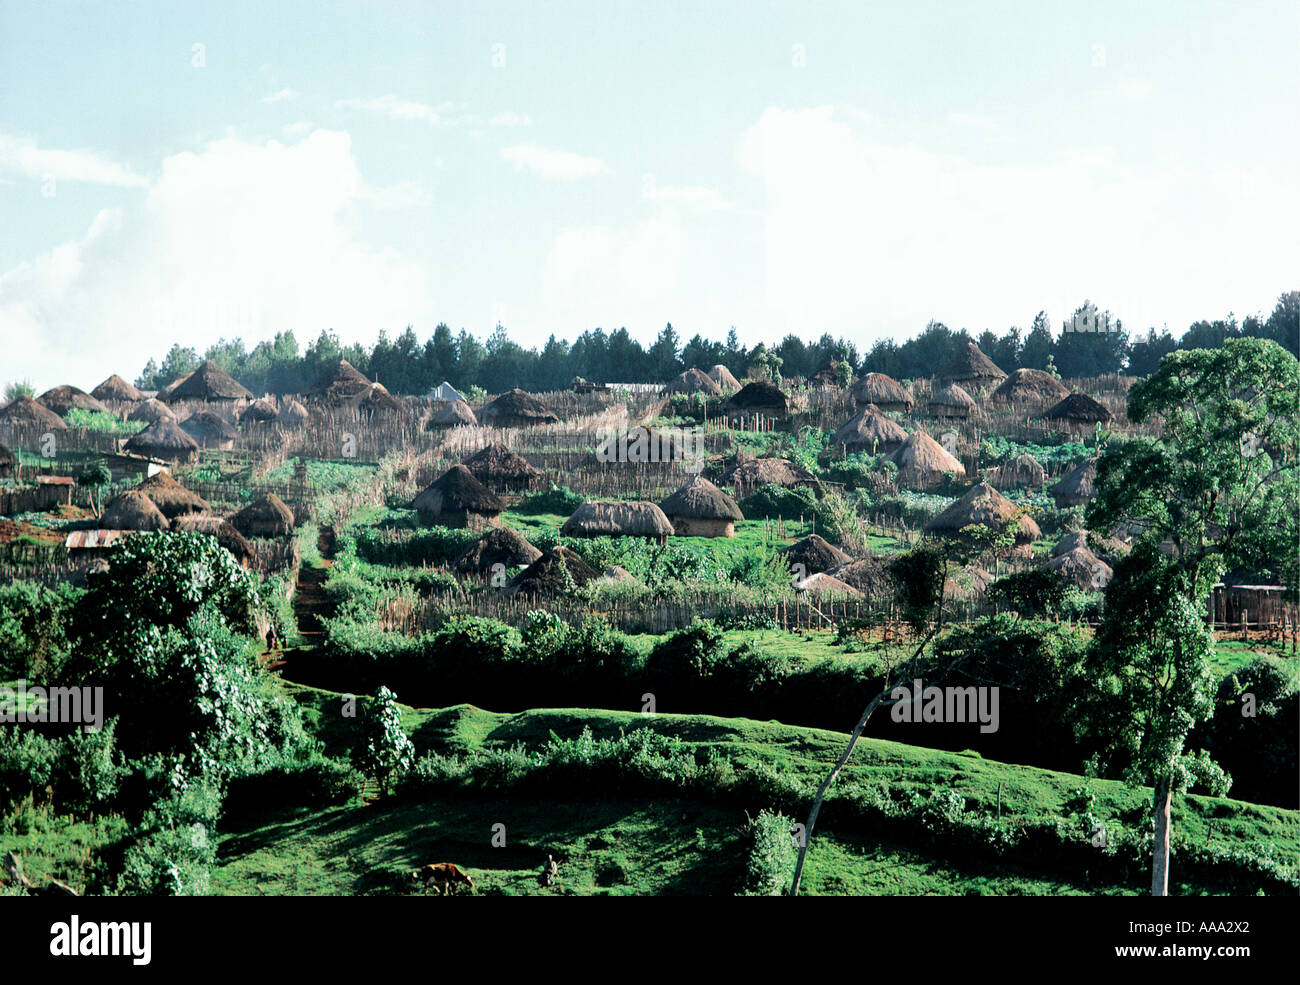 Congested Kikuyu village or settlement on eastern side of Aberdare Mountains in Central Province Kenya East Africa Stock Photo